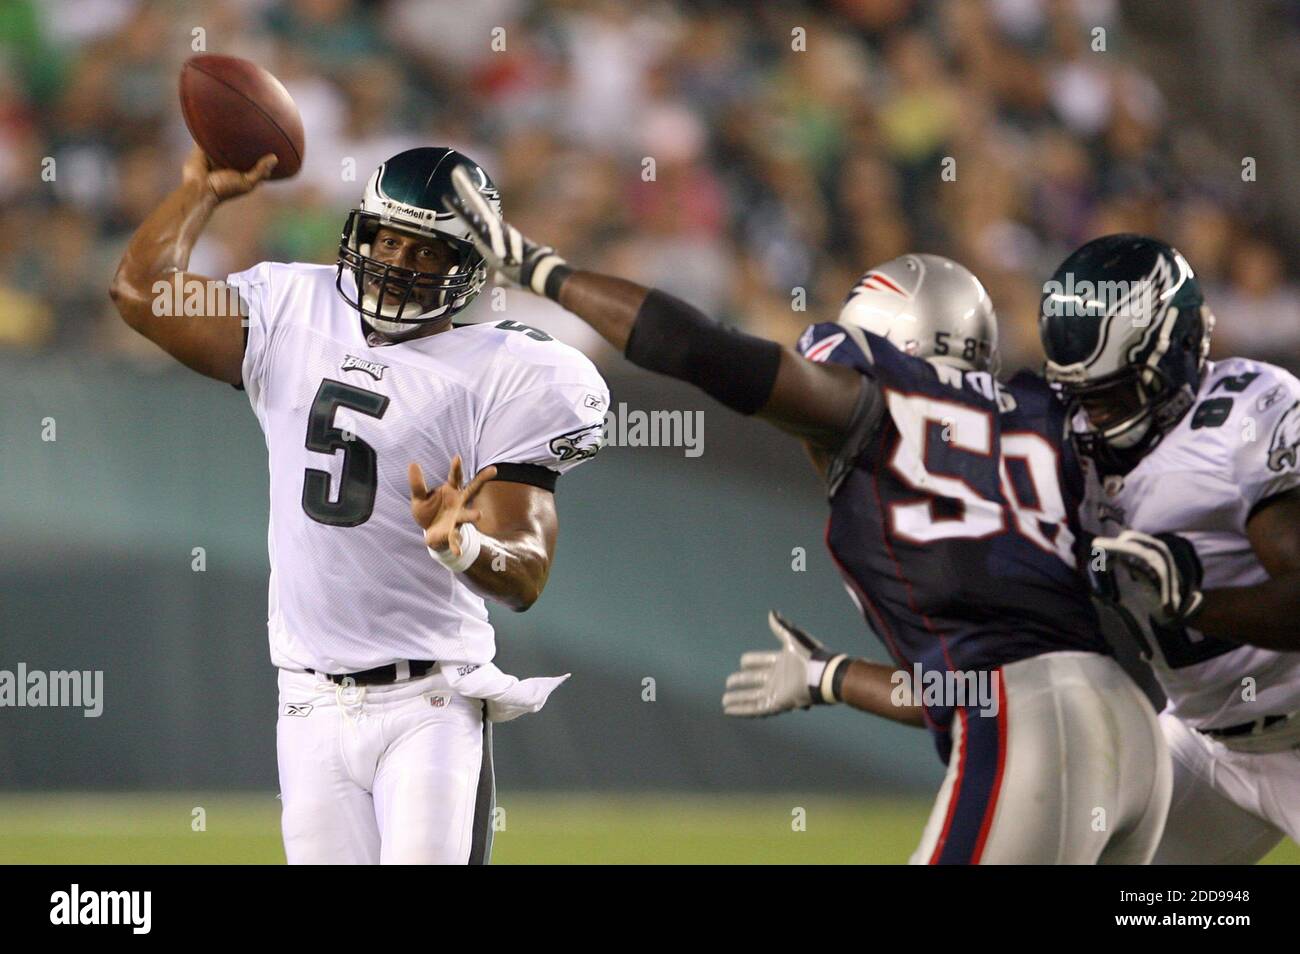 NO FILM, NO VIDEO, NO TV, NO DOCUMENTARY - Philadelphia Eagles' Donovan McNabb throws the football against the New England Patriots during the Preseason Football match between New England Patriots and Philadelphia Eagles at Lincoln Field in Philadelphiaon in Pennsylvania, USA on August 13, 2009. Photo by Clem Murray/MCT/Cameleon/ABACAPRESS.COM Stock Photo